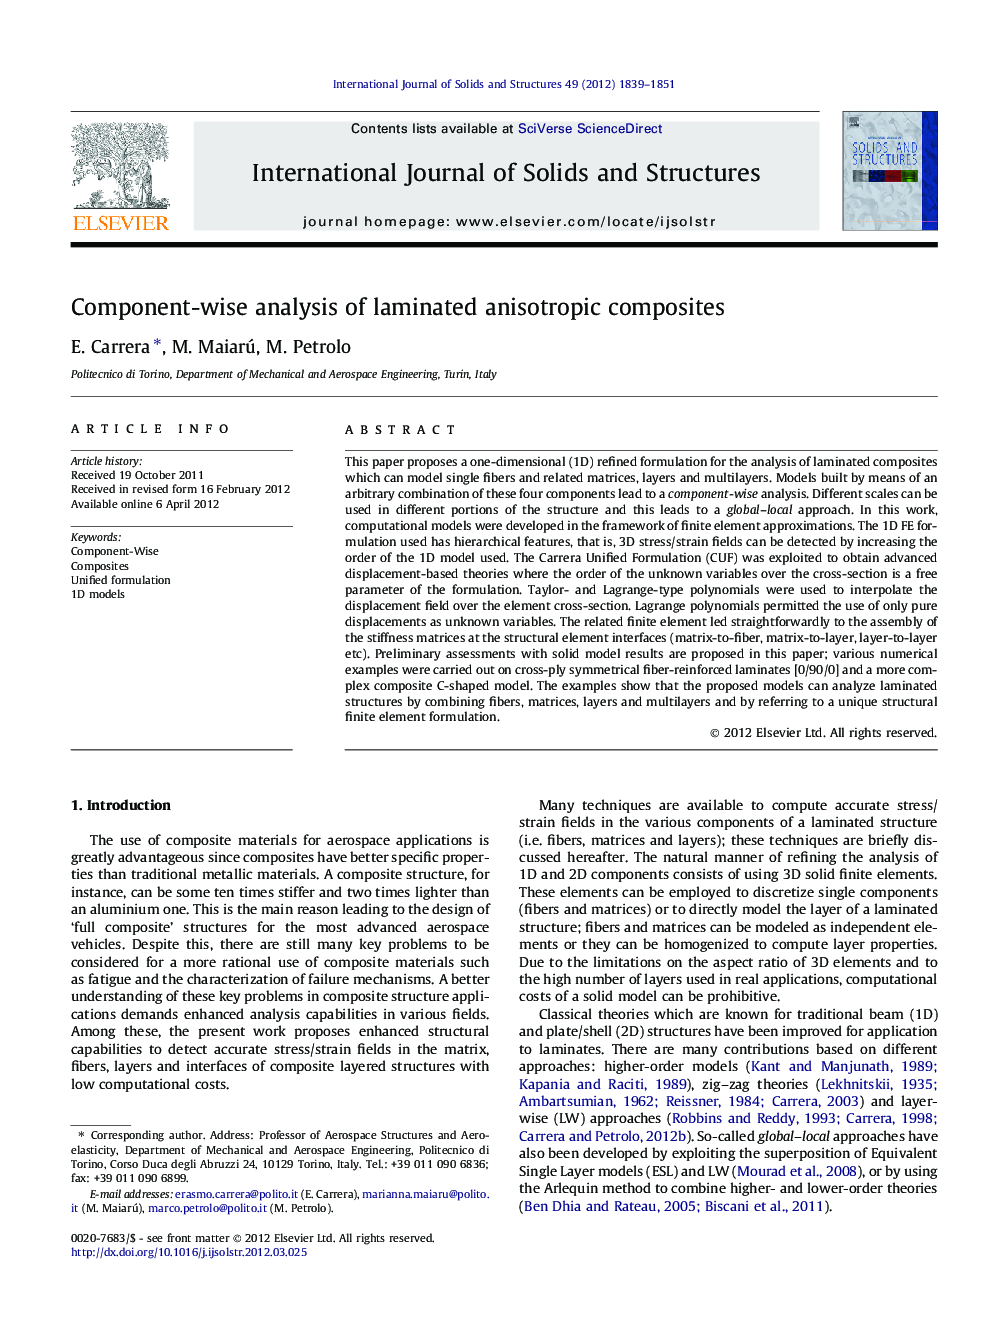 Component-wise analysis of laminated anisotropic composites